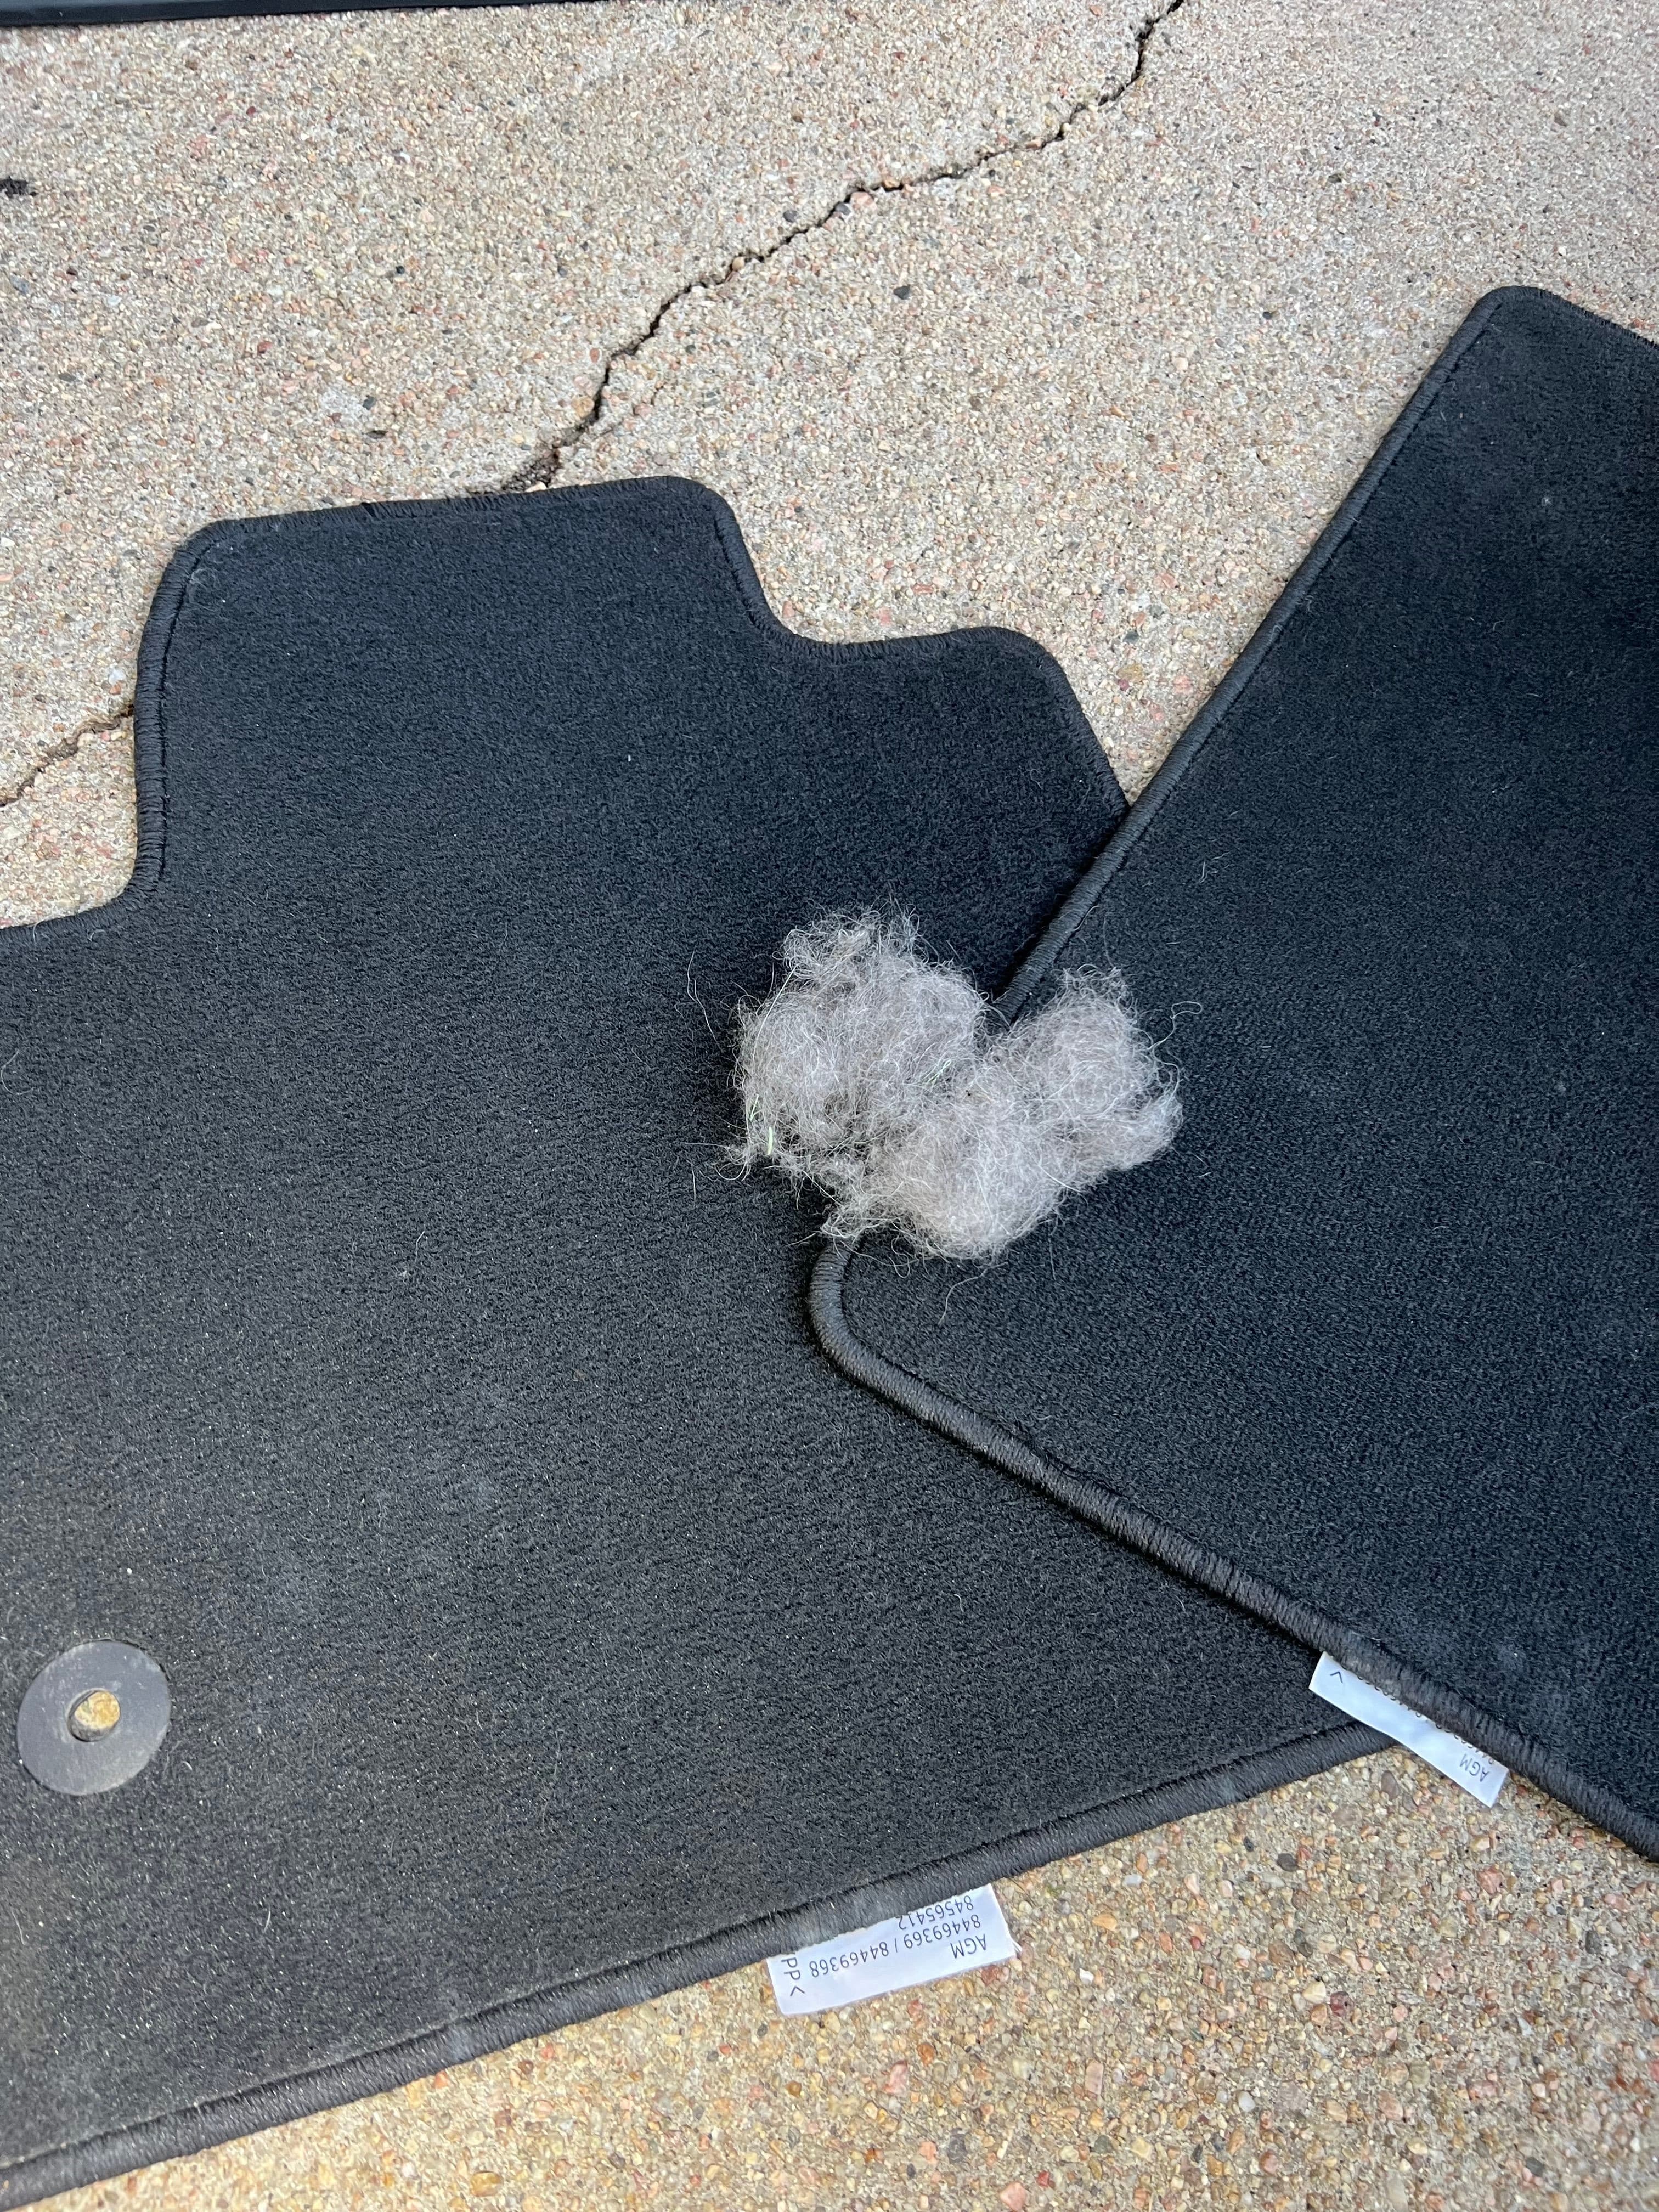 Take a look at all of the pet hair that came out of these 2 floor mats